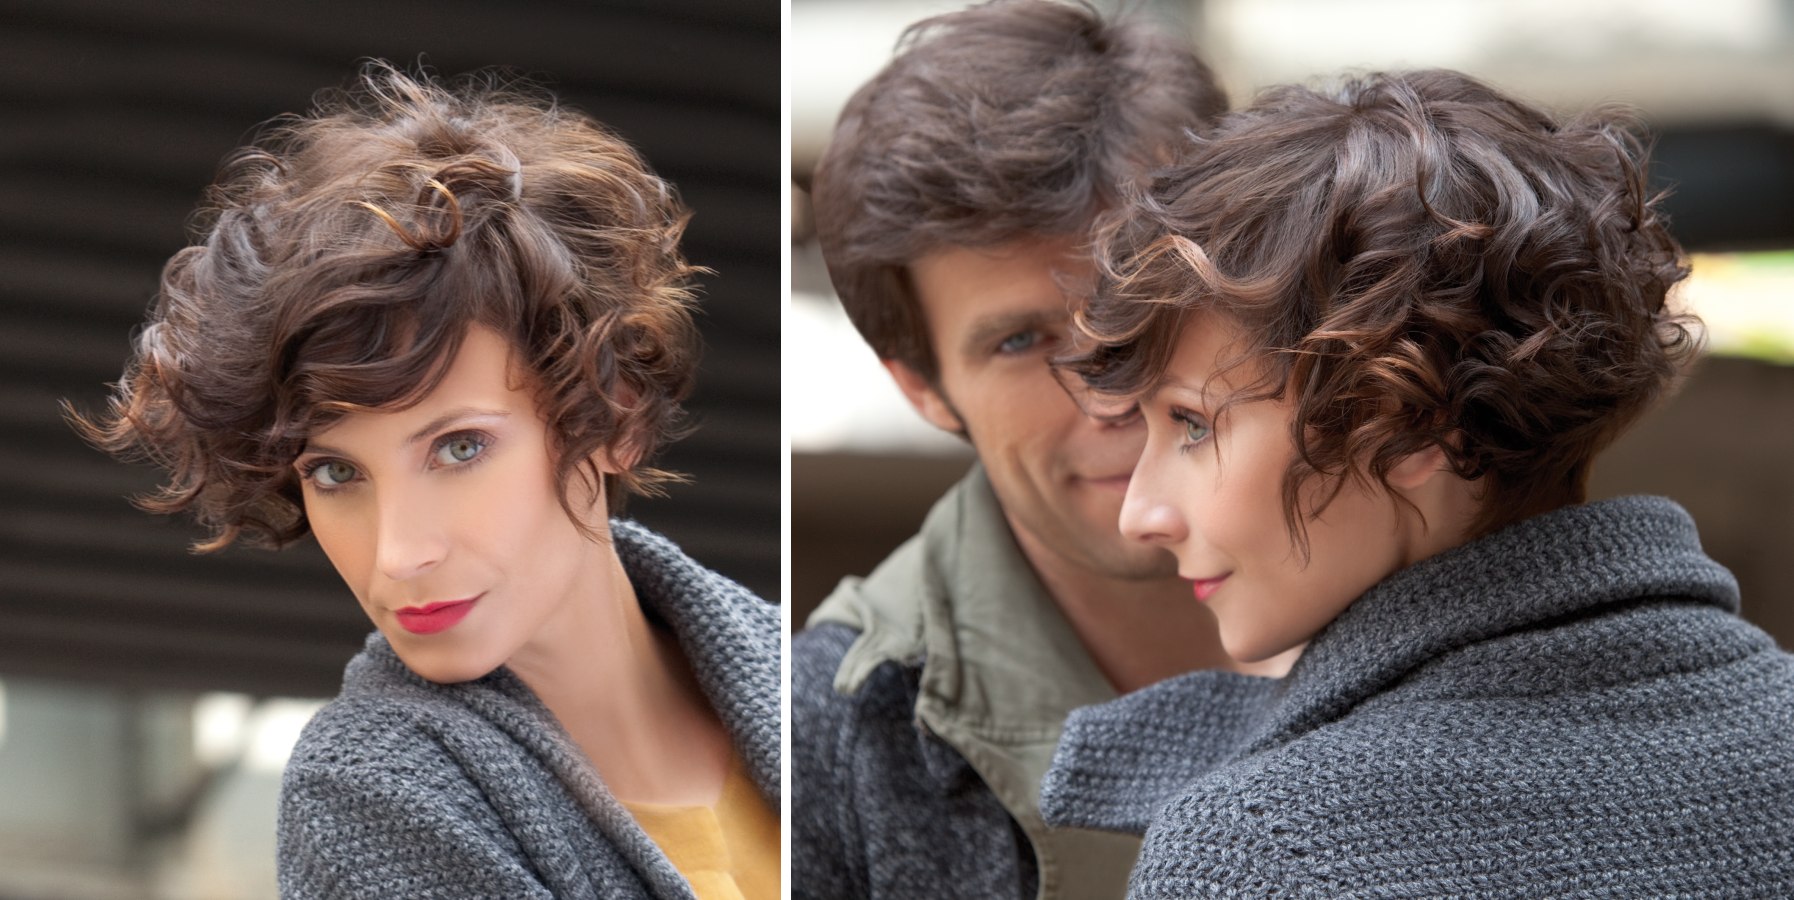 Hairstyles With A Reinterpretation Of Vintage Styles From The